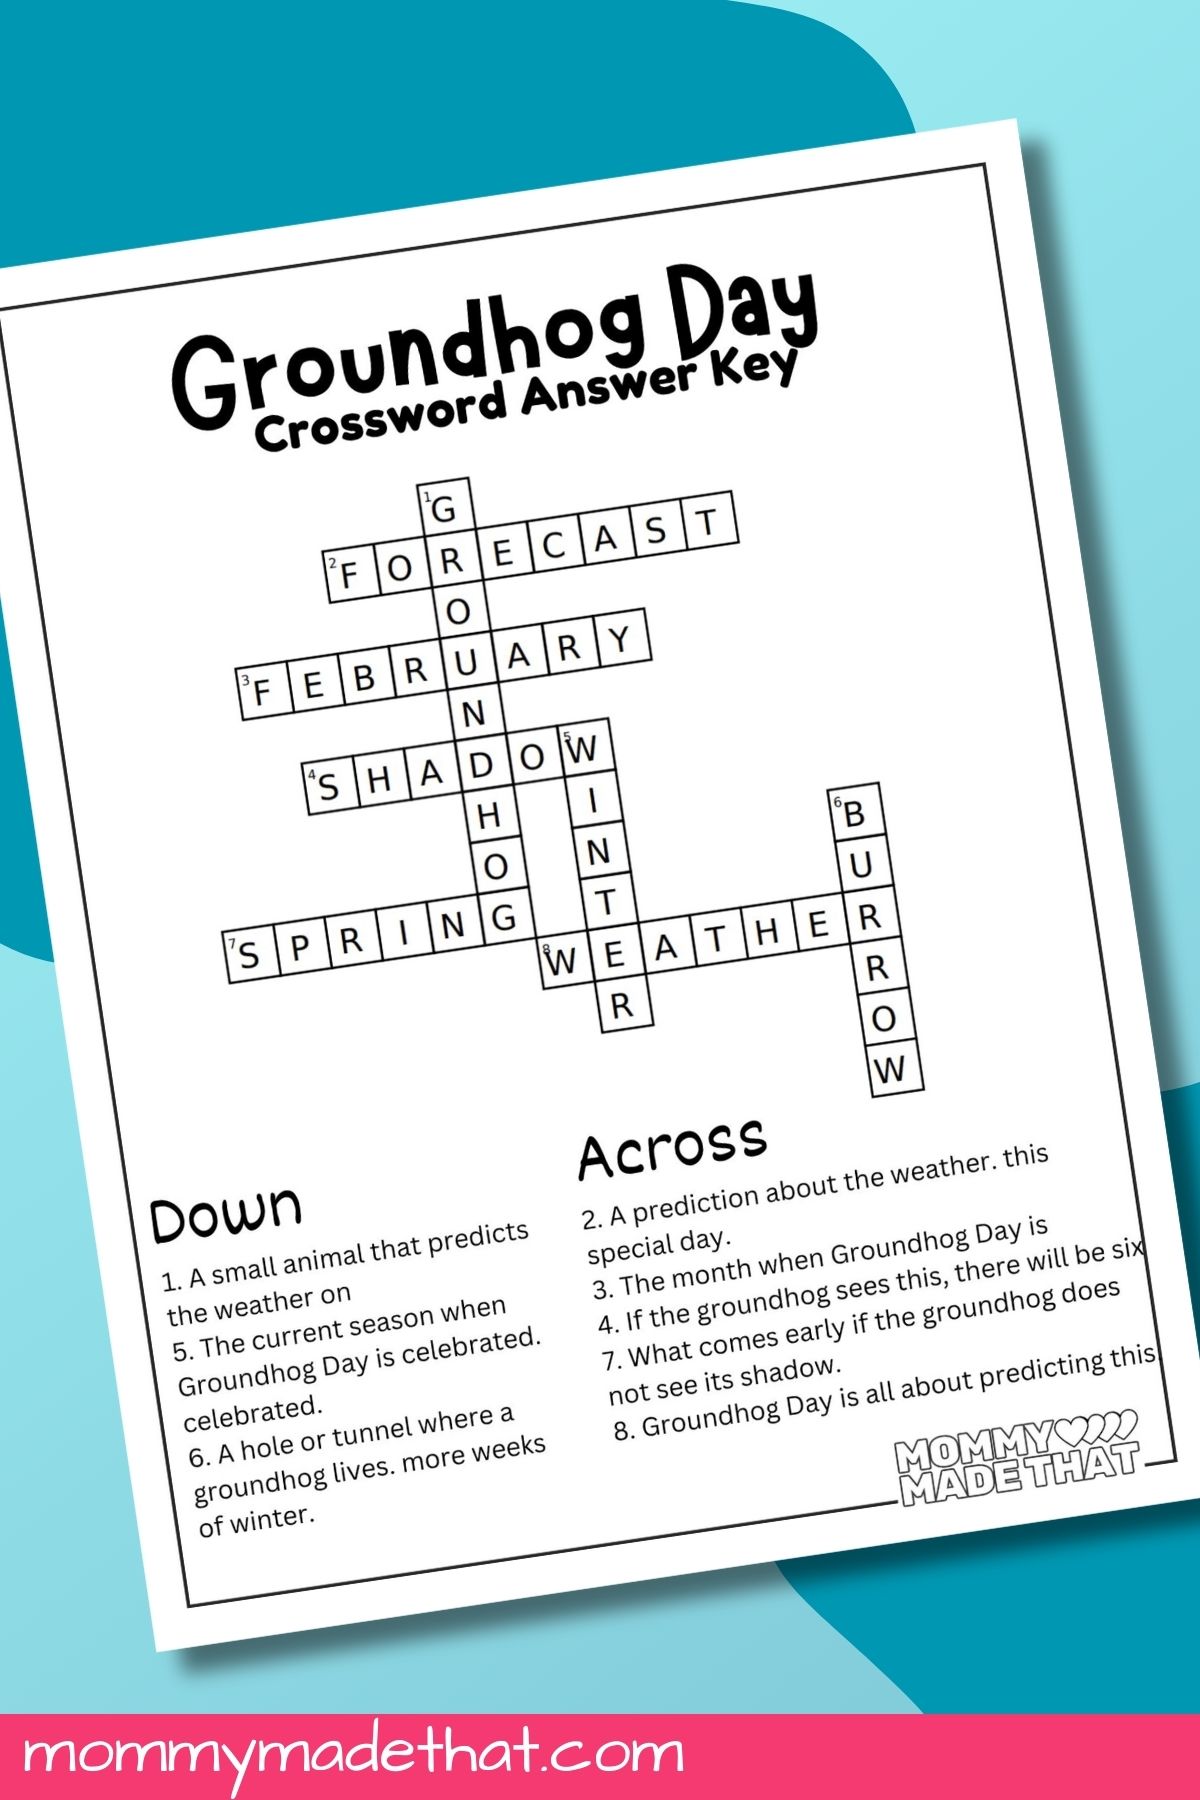 Free printable Groundhog day crossword puzzle answer key.